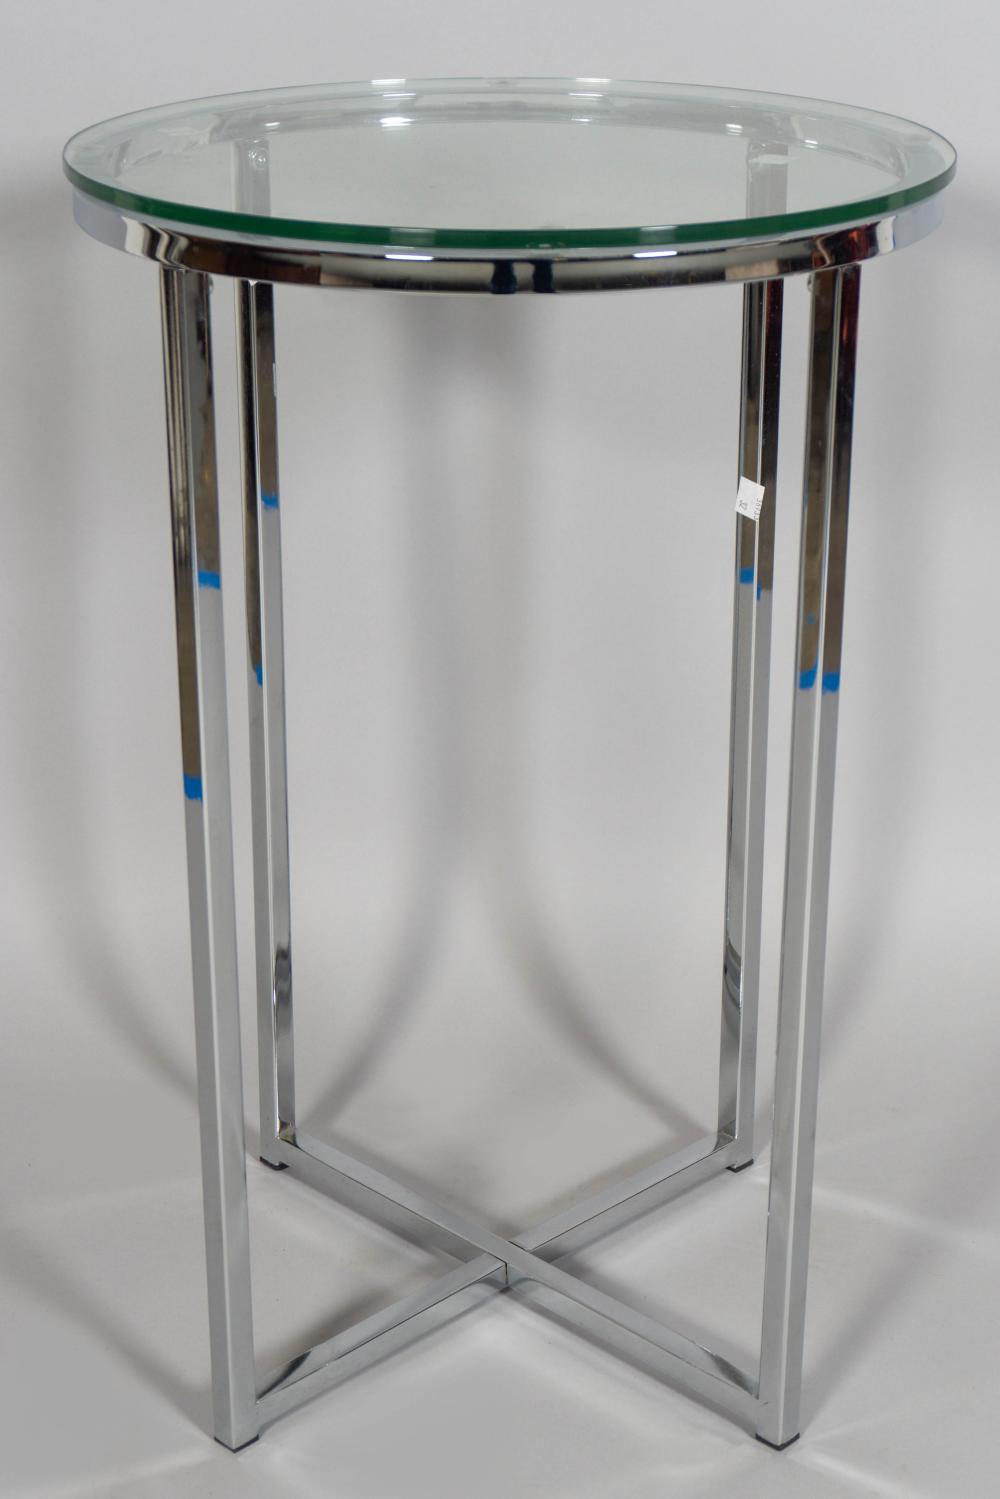 CONTEMPORARY CHROME SIDE TABLE